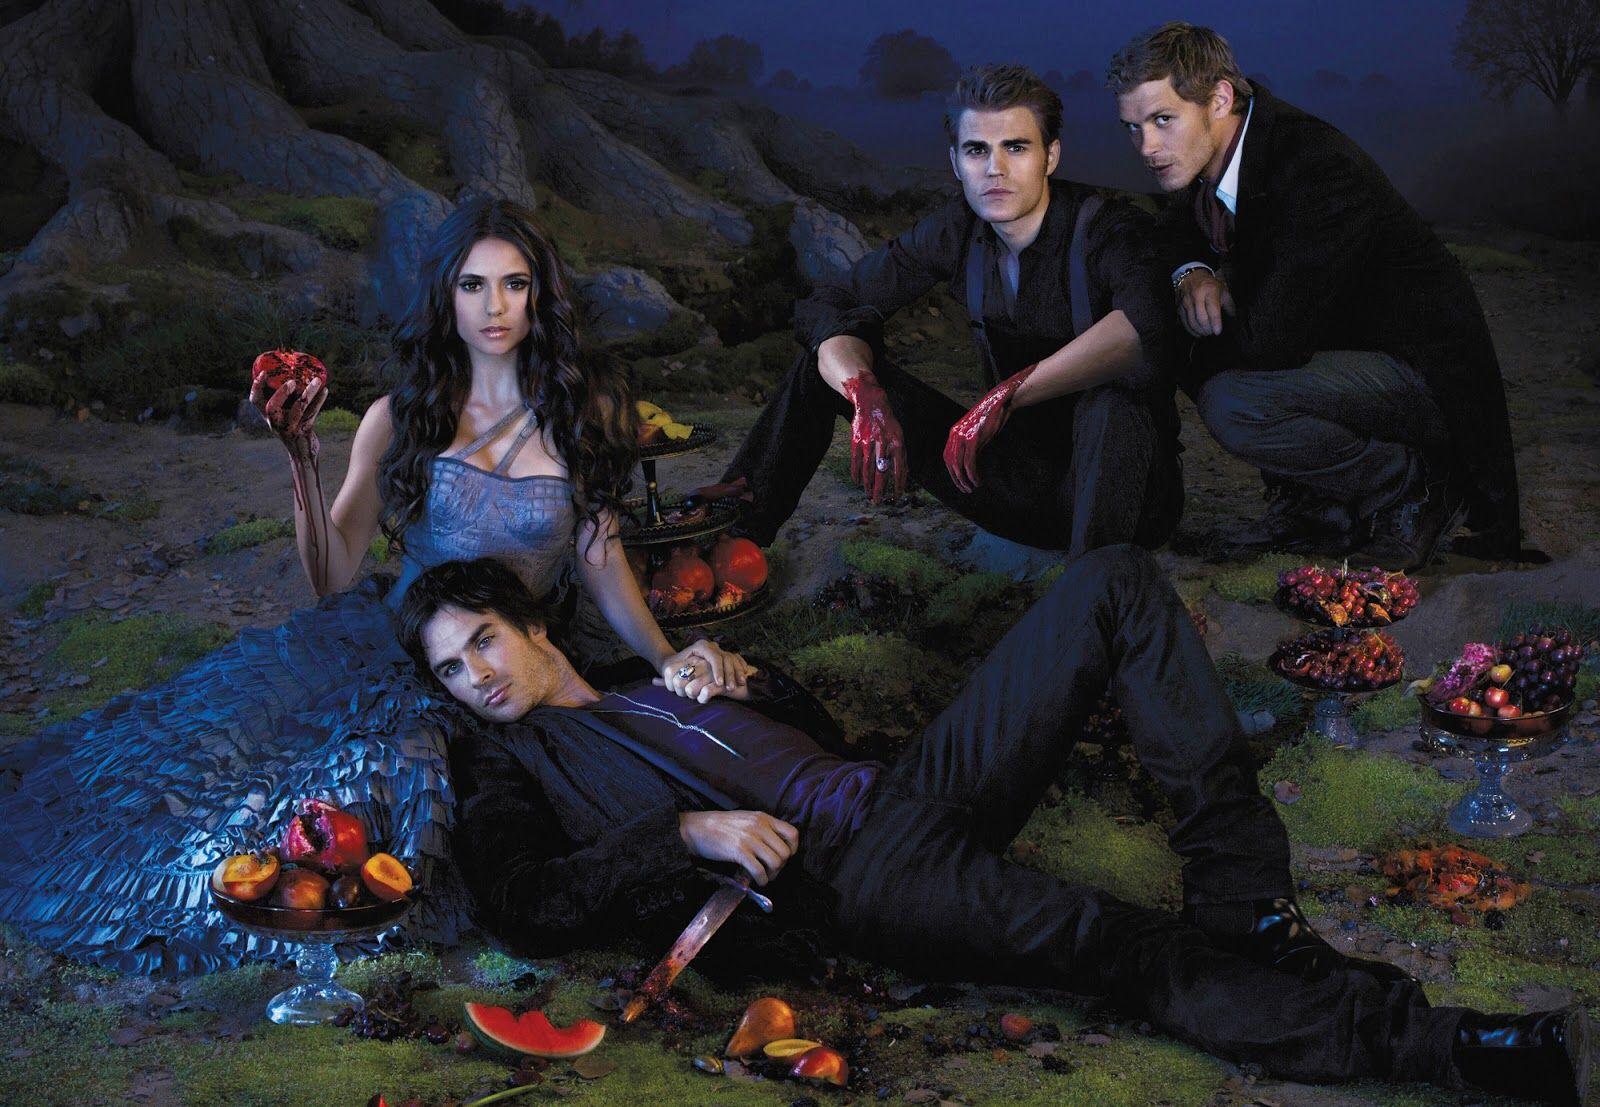 The Vampire Diaries Photo, Wallpaper and Picture Gallery